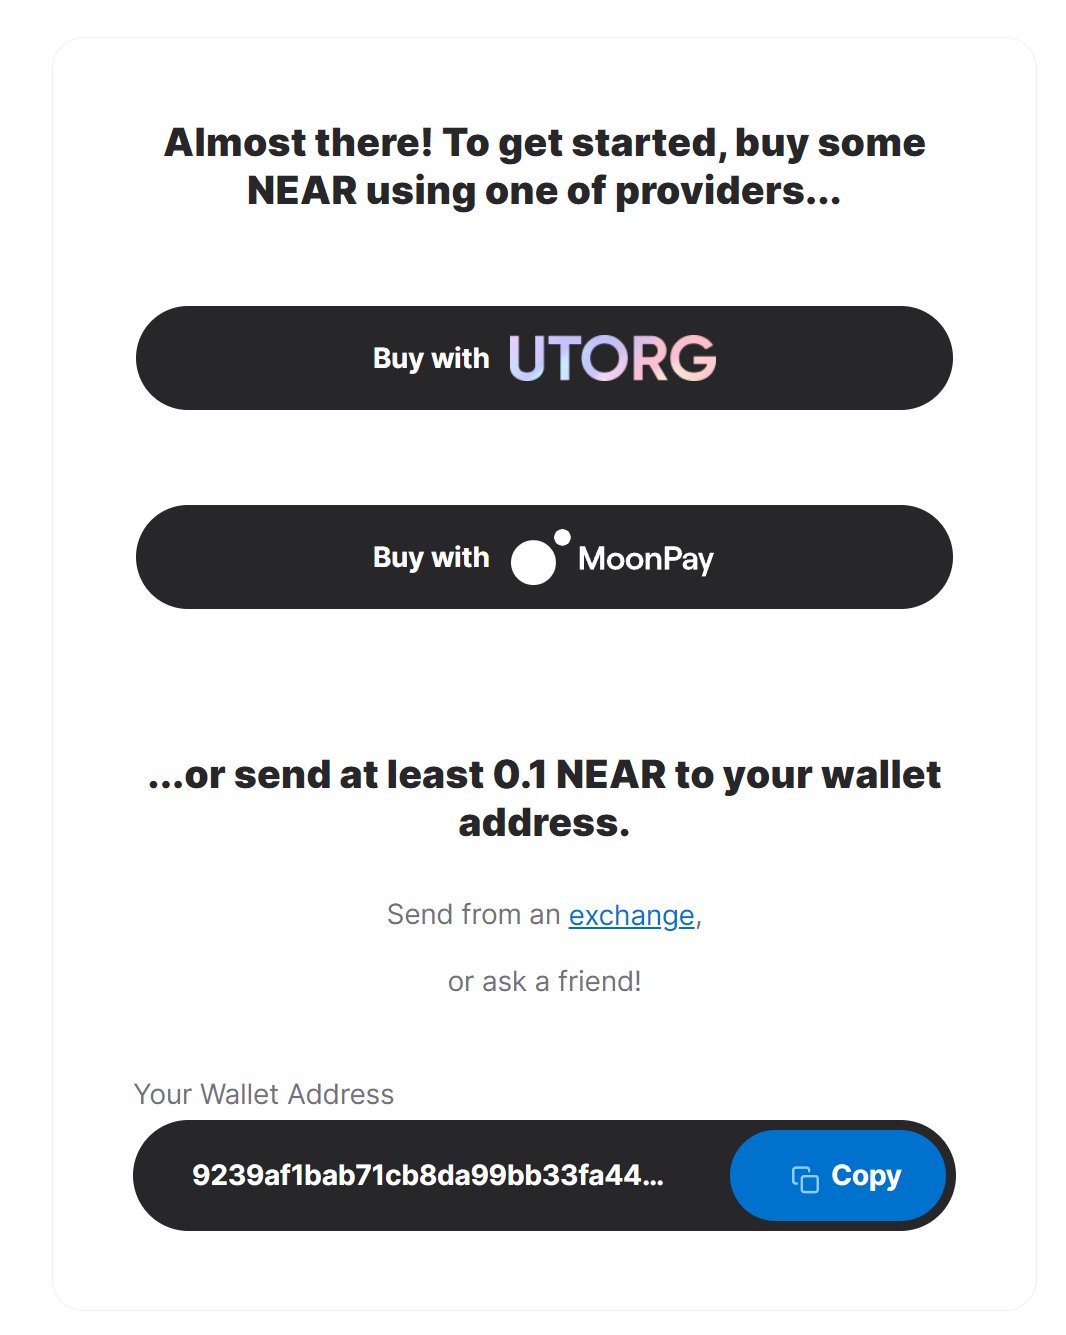 Mainnet Funding Account Page. You can fund your account through several ways, this page lets you fund it with a card using UTORG or MoonPay services, or you can send 0.1 NEAR to your wallet address listed.